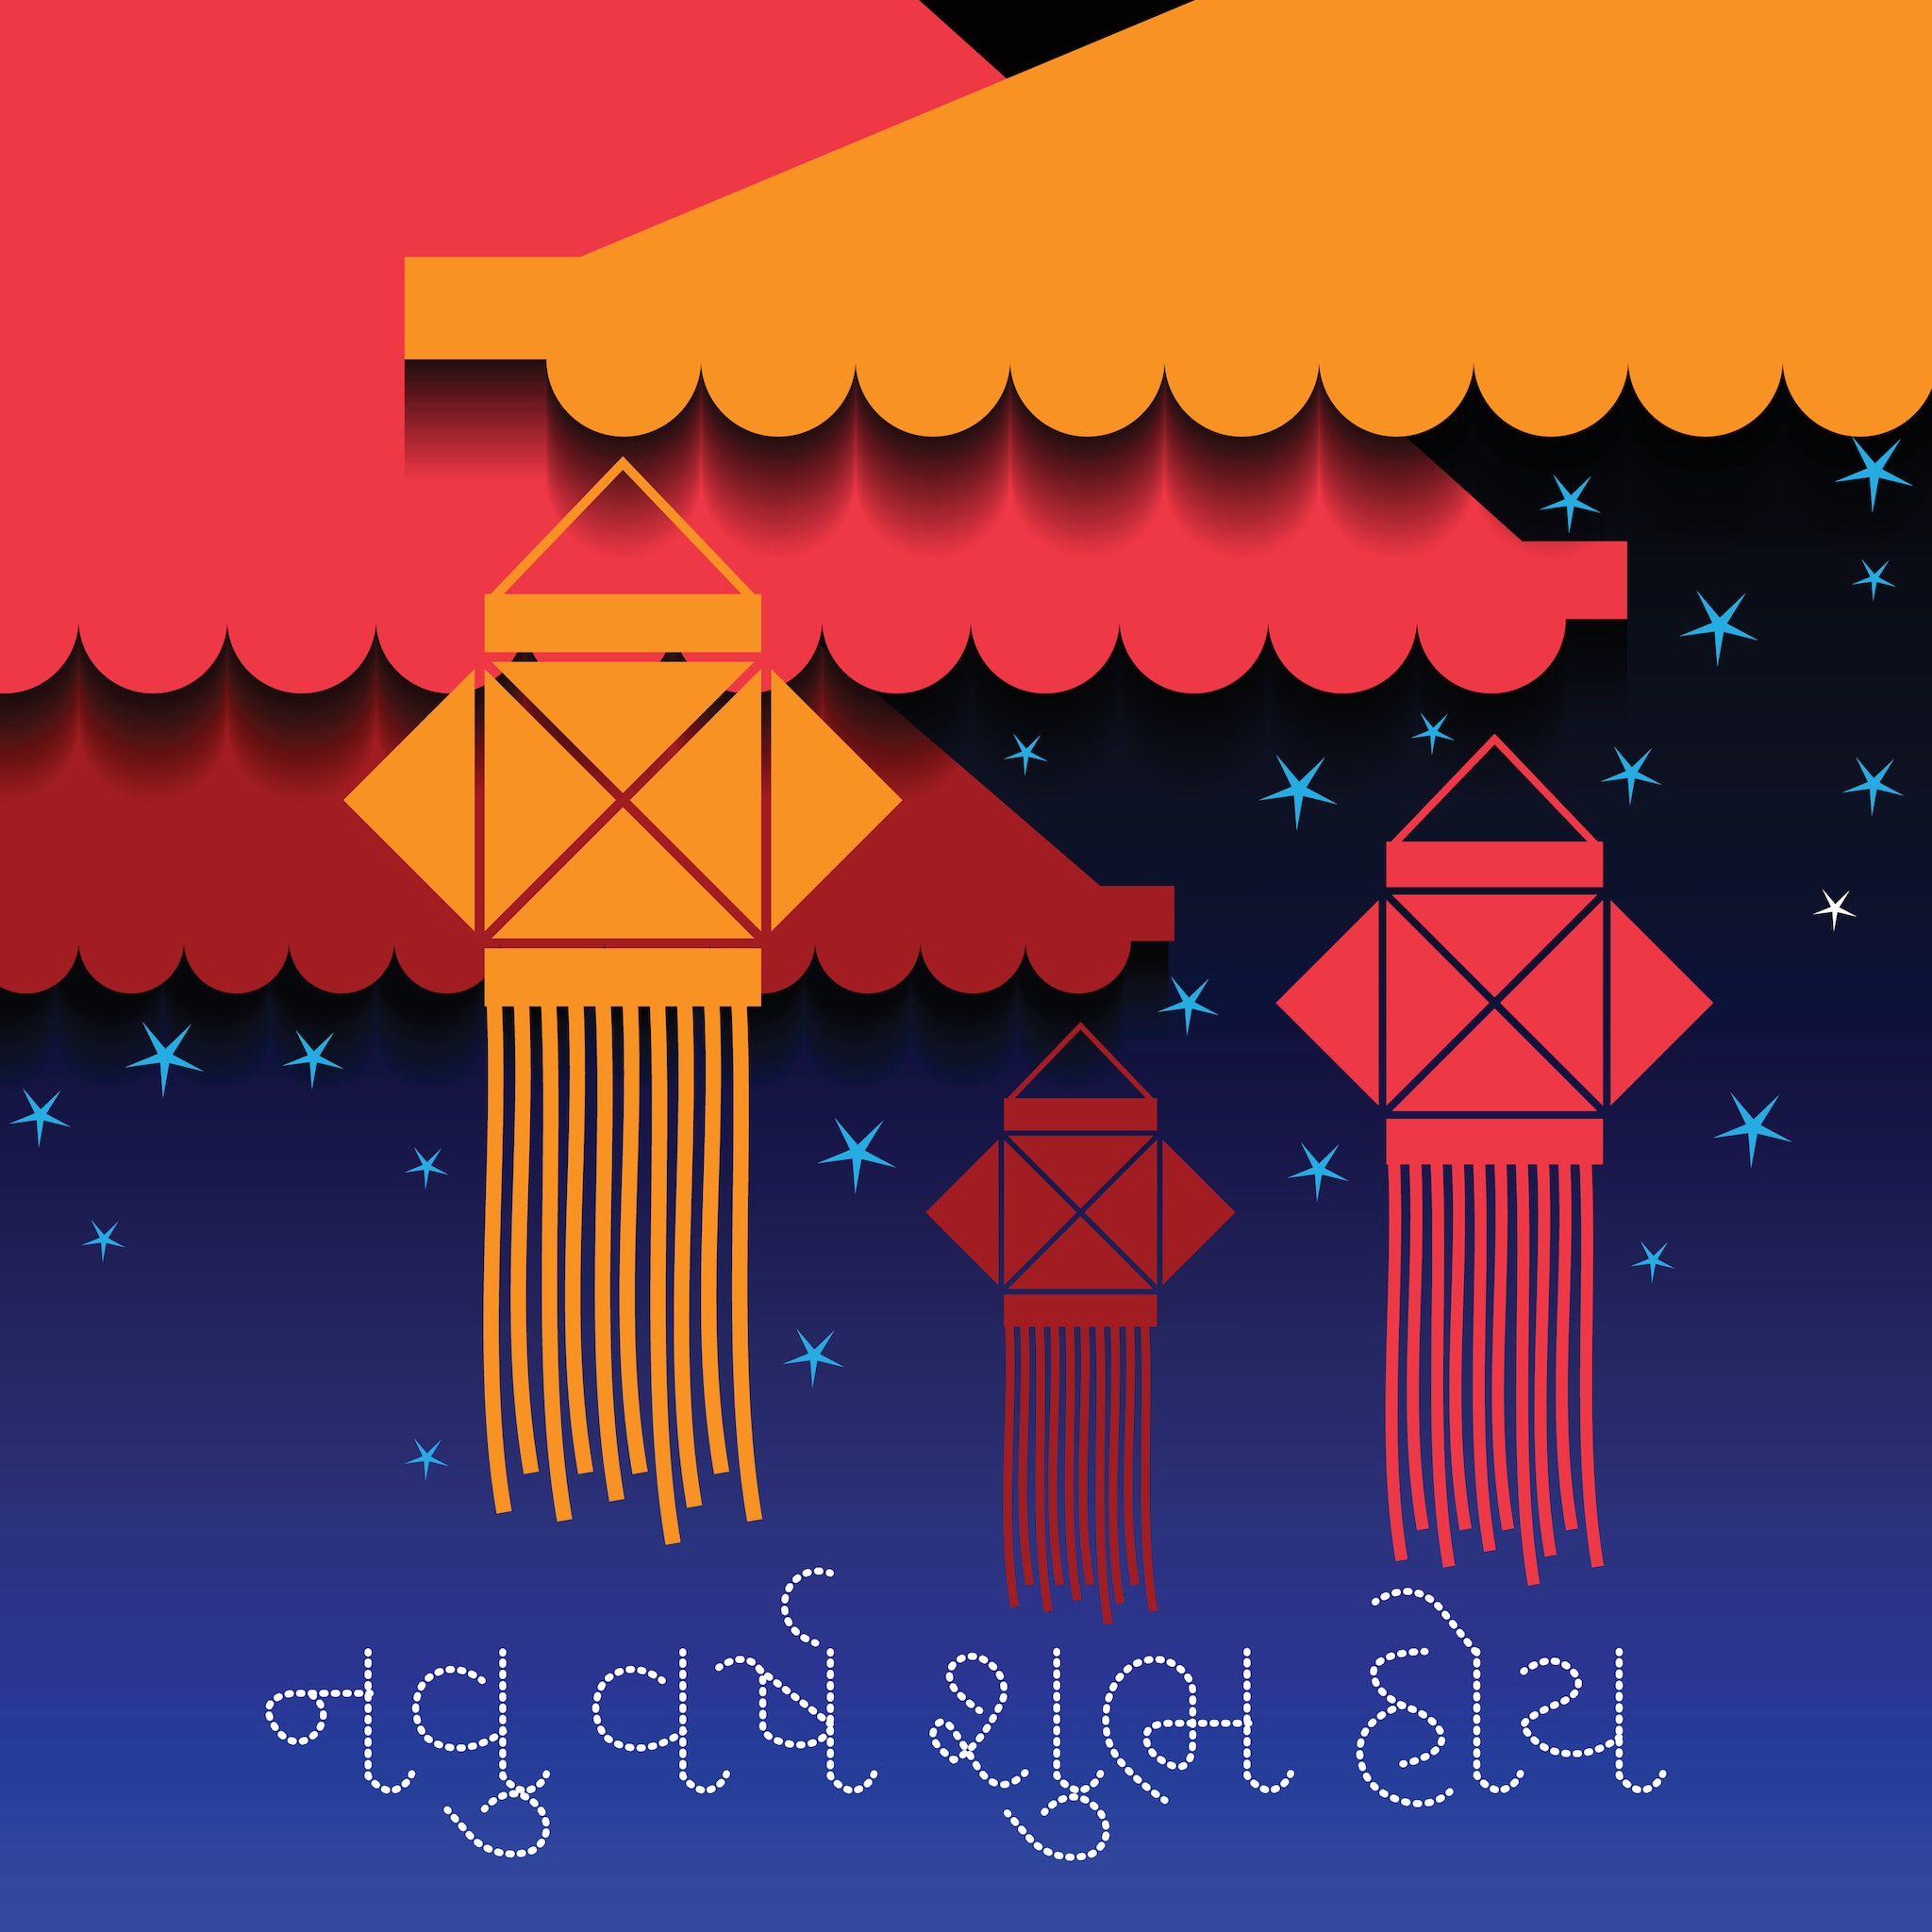 Happy Gujarati New Year 2021: Wishes, Greetings, WhatsApp Status, Images and Quotes that you can share with your loved ones.  (Image: Shutterstock)